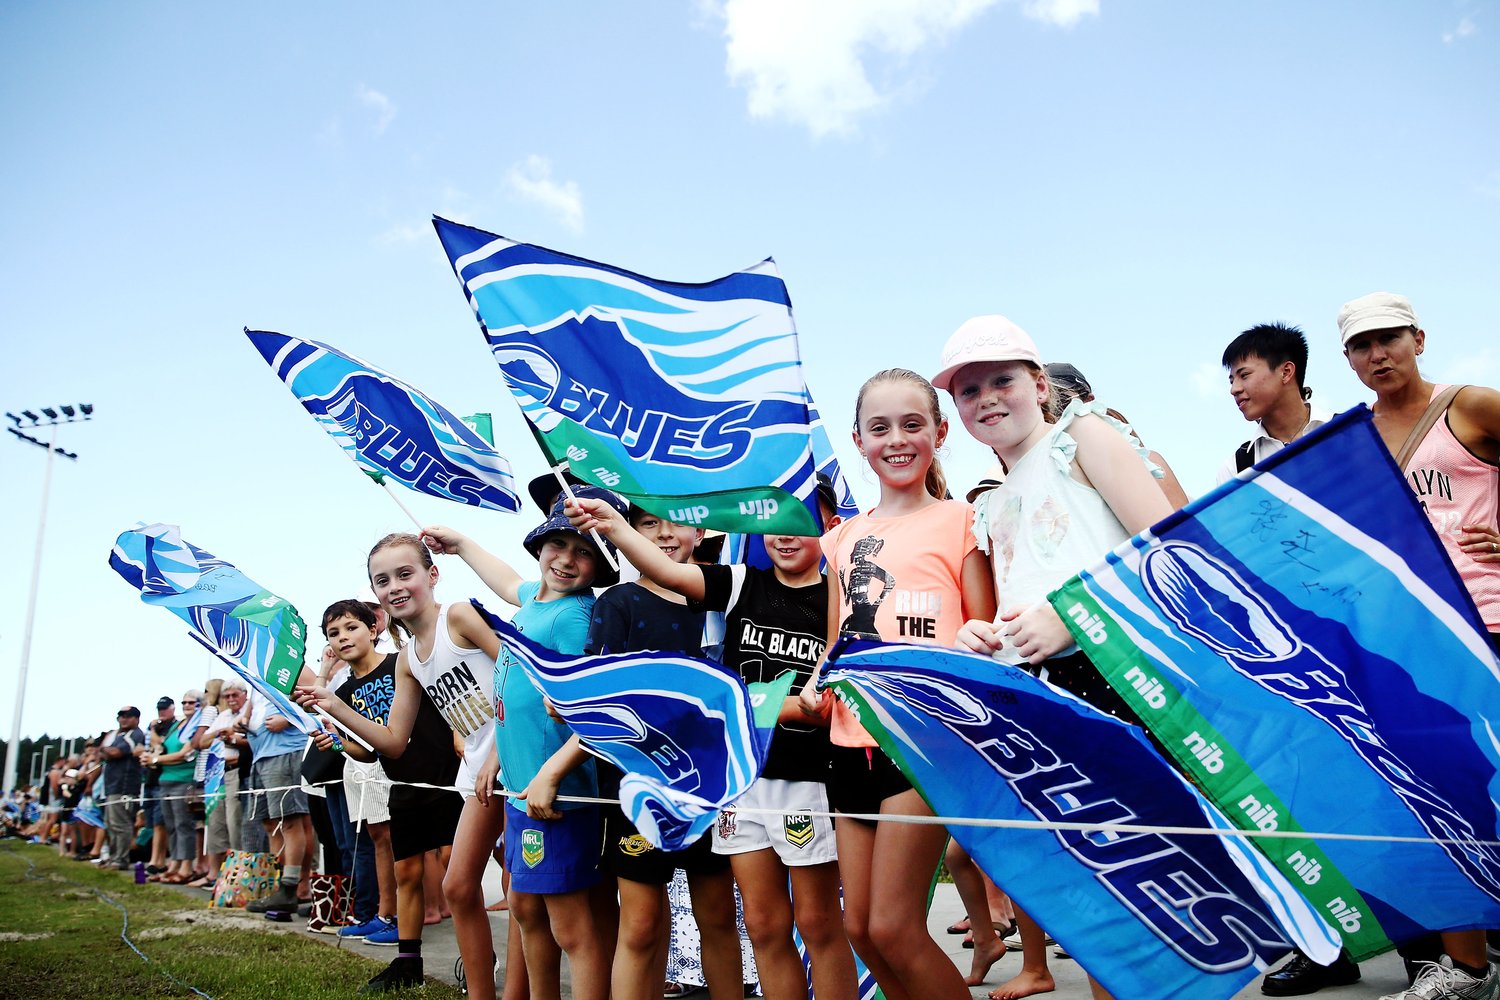 HOT SUMMER FORCES BLUES TO MOVE PRE-SEASON GAME TO TAKAPUNA — Blues Rugby